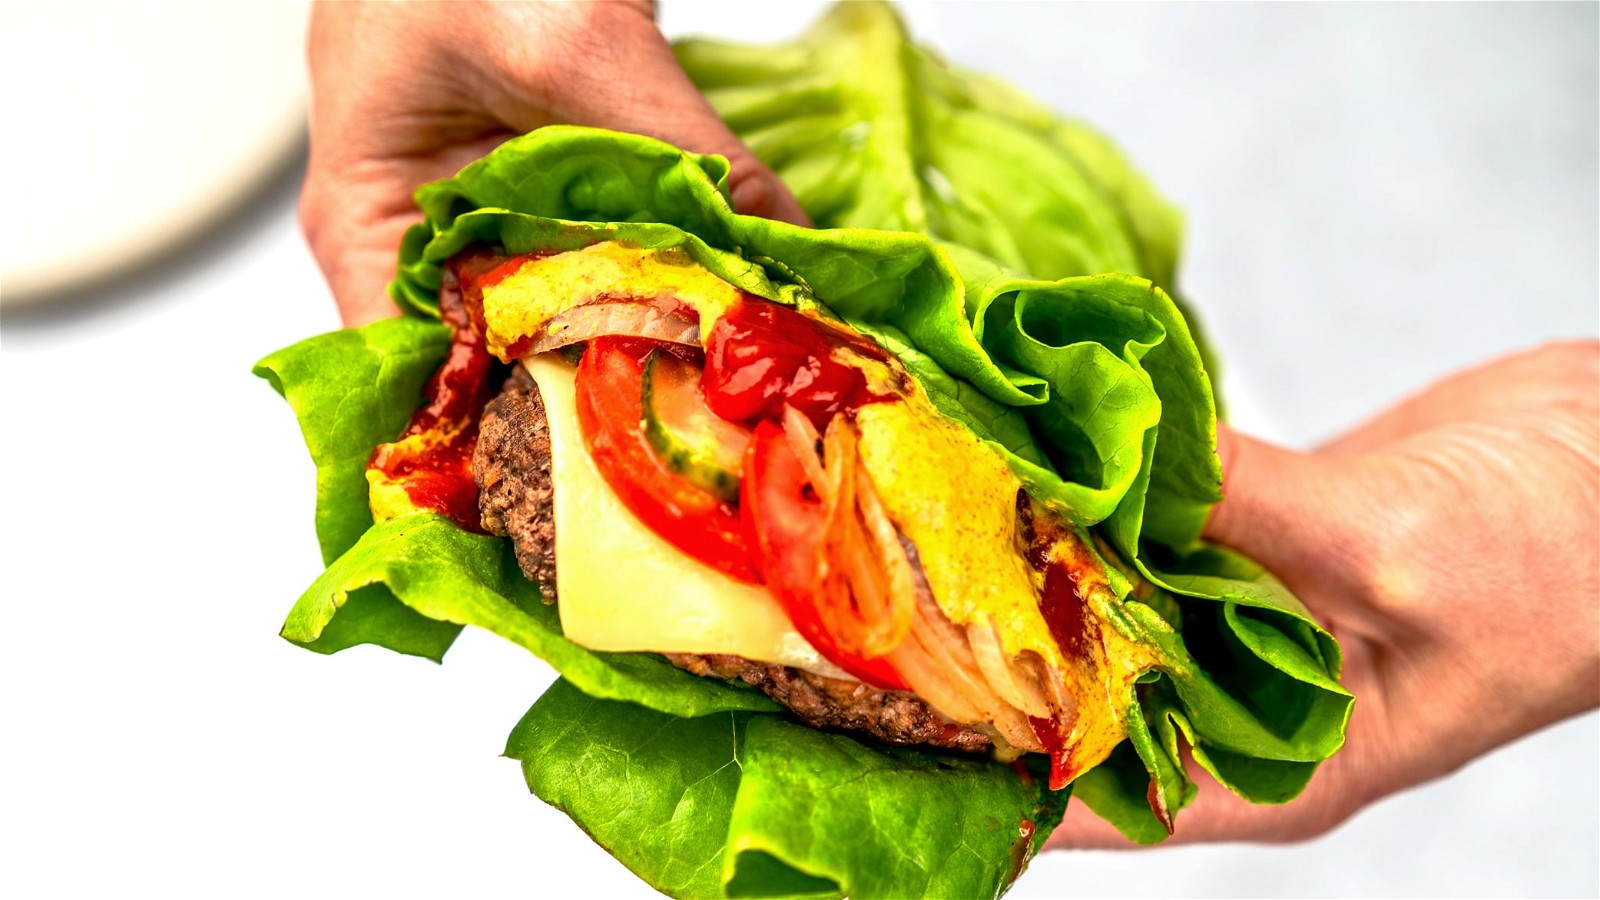 Image of Classic Cheeseburger with Lettuce Wrap